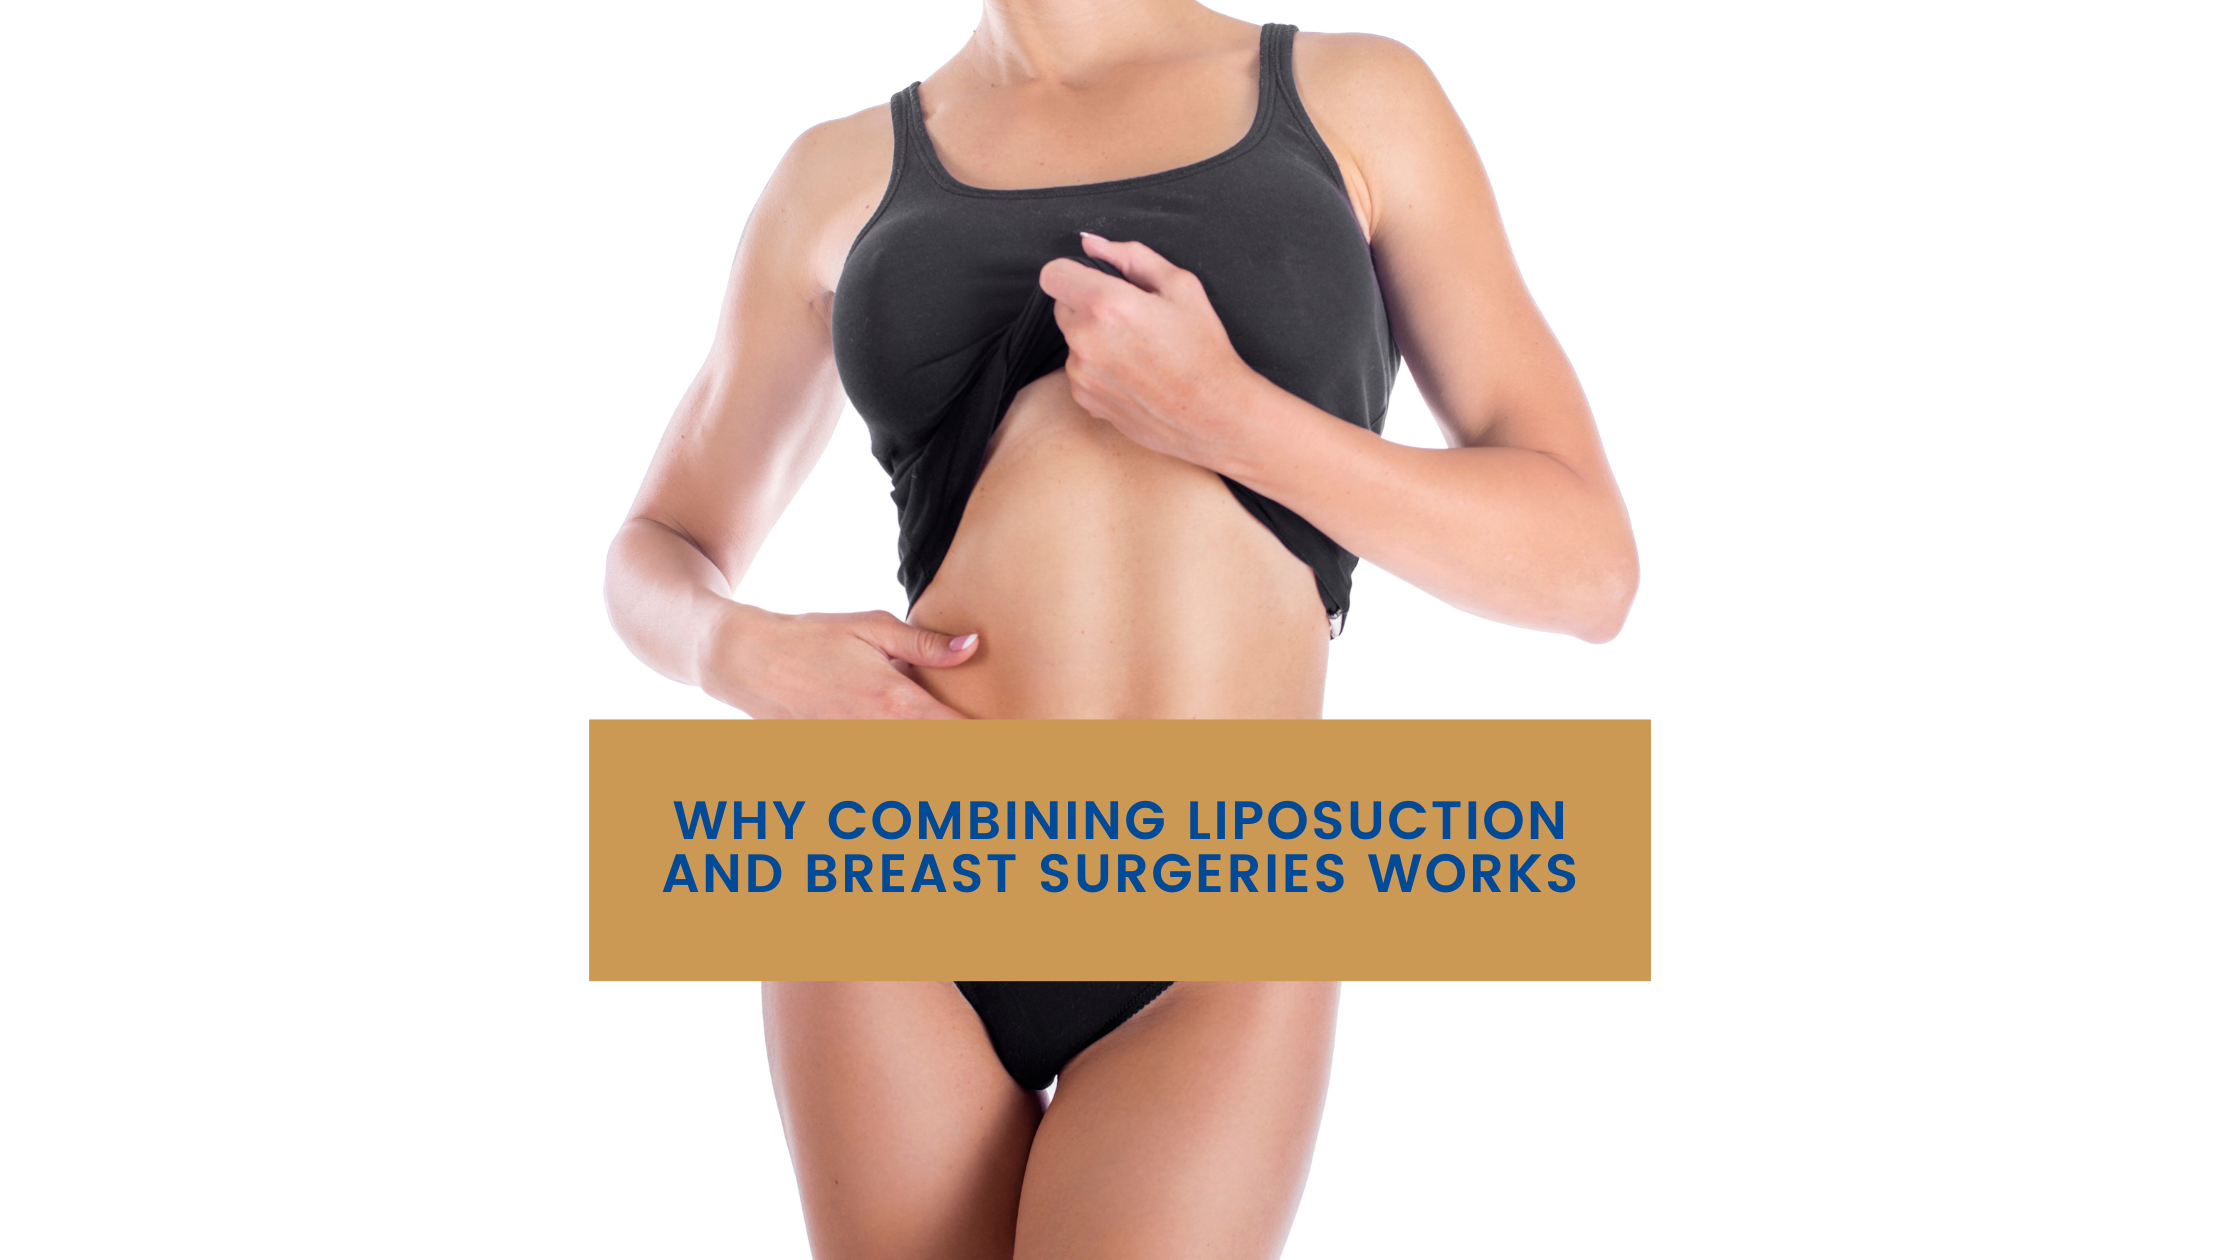 Why Combining Liposuction and Breast Surgeries Works